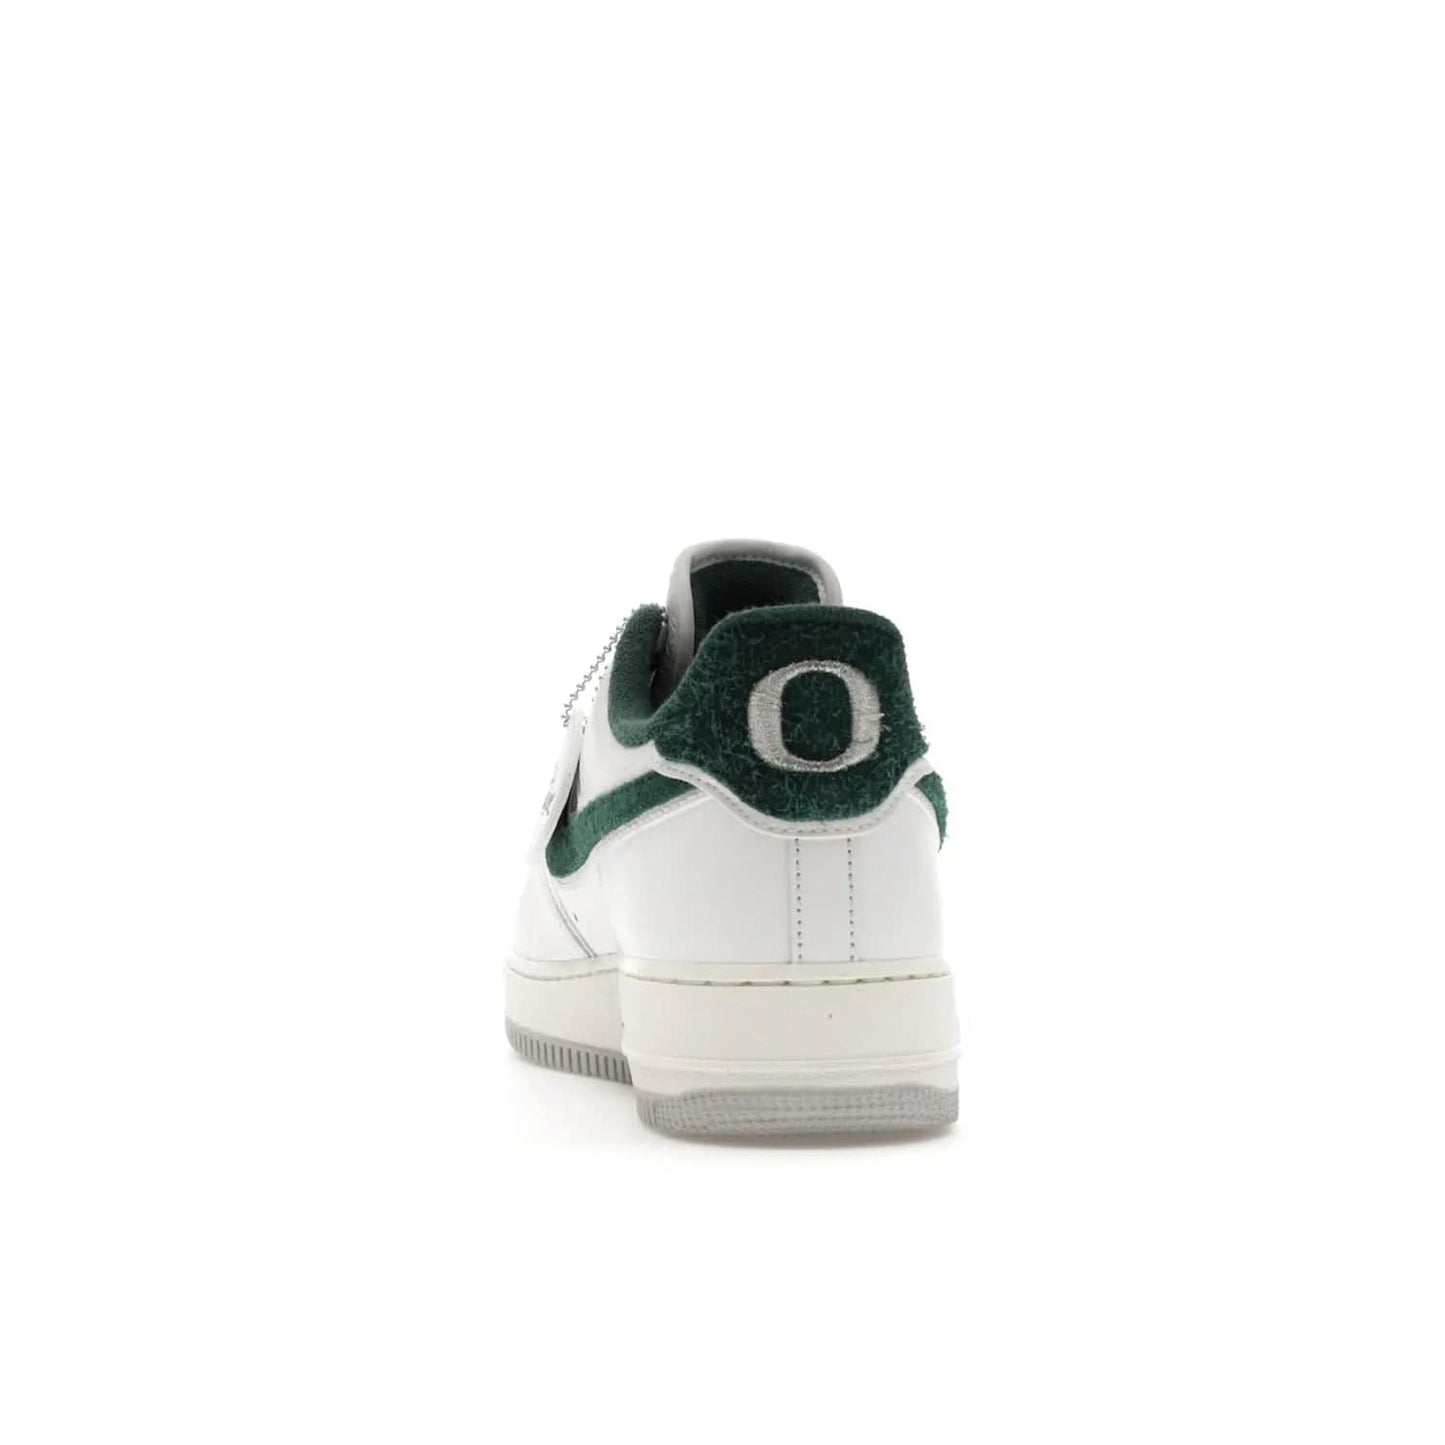 Nike Air Force 1 Low '07 Premium University of Oregon PE - Image 27 - Only at www.BallersClubKickz.com - The Nike Air Force 1 Low '07 Premium. Special Oregon University colorway. White base with green and sail accents. Cushioned rubber midsole. Comfort and style. Support your school!